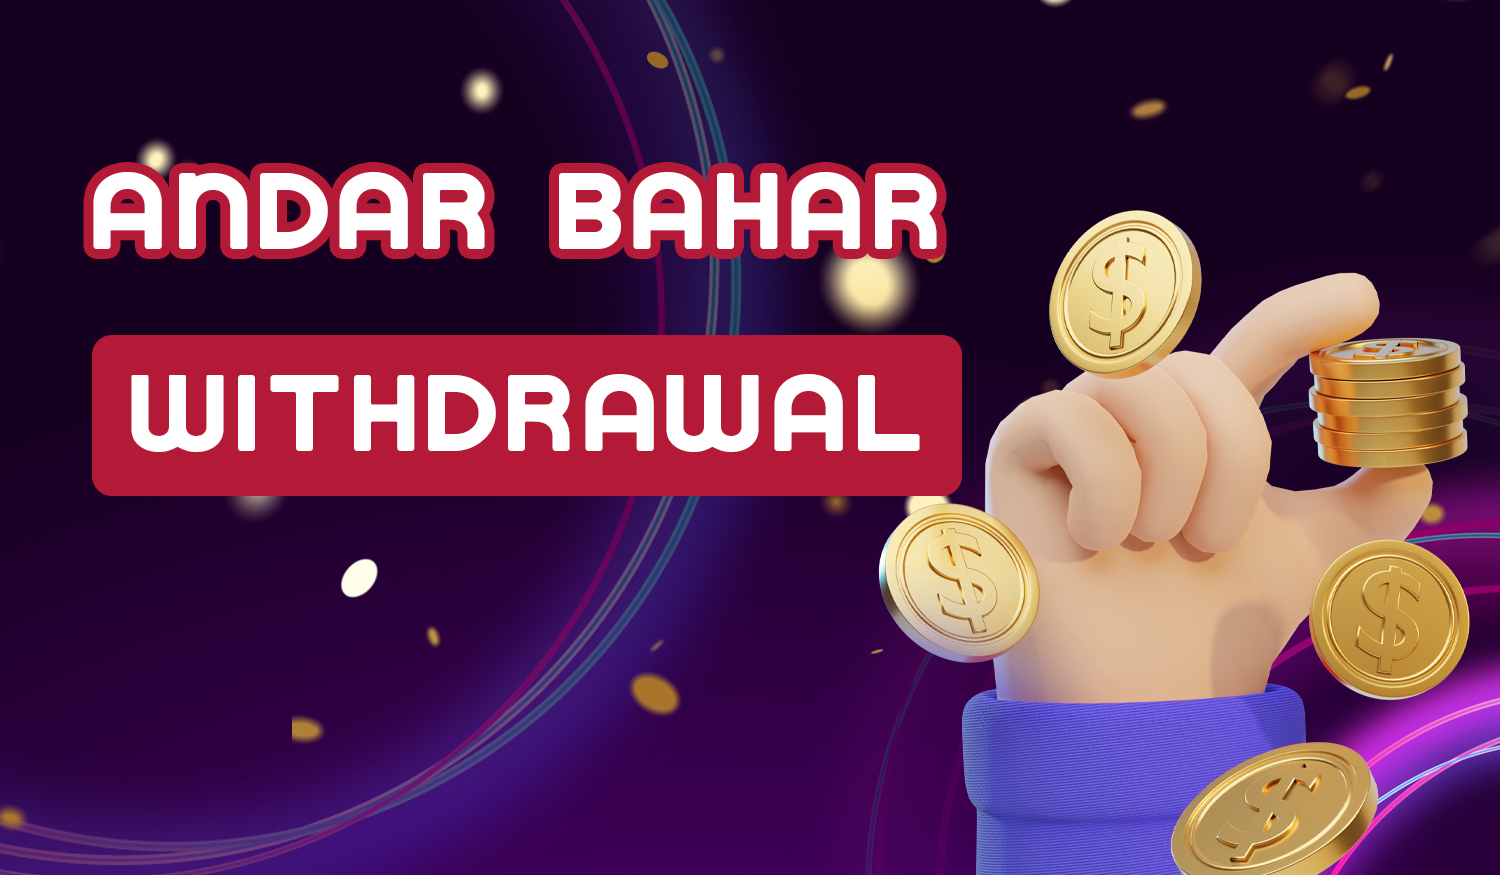 With what payment systems and what amounts can be withdrawn from the account after winning in Andar Bahar